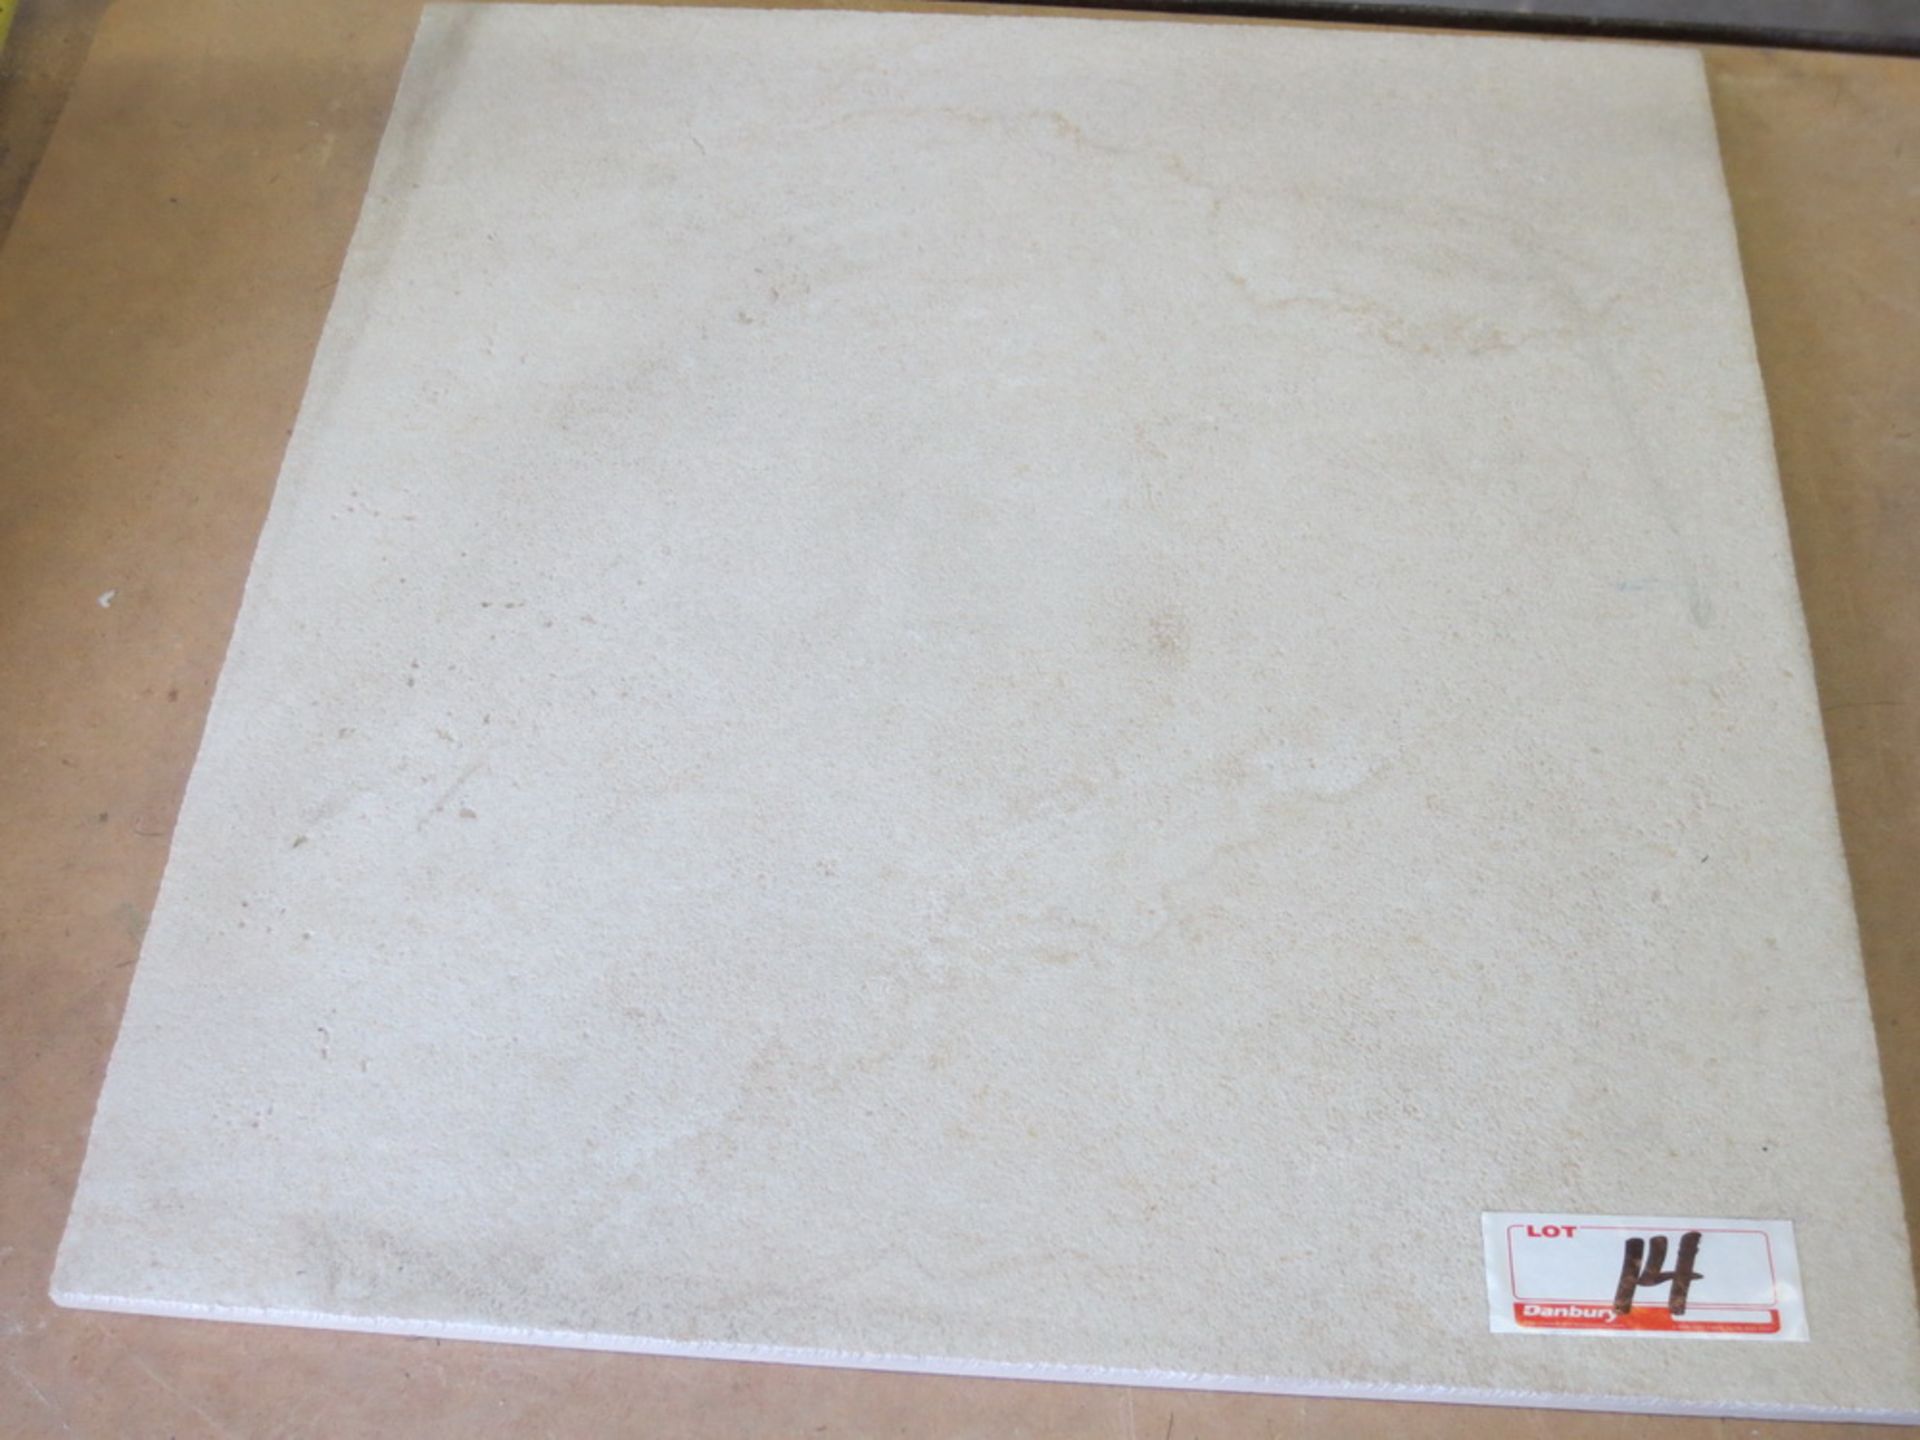 622 - SQ. FT. BEIGE APPROX 15.5X15.5 CERAMIC TILE 51 BOXES